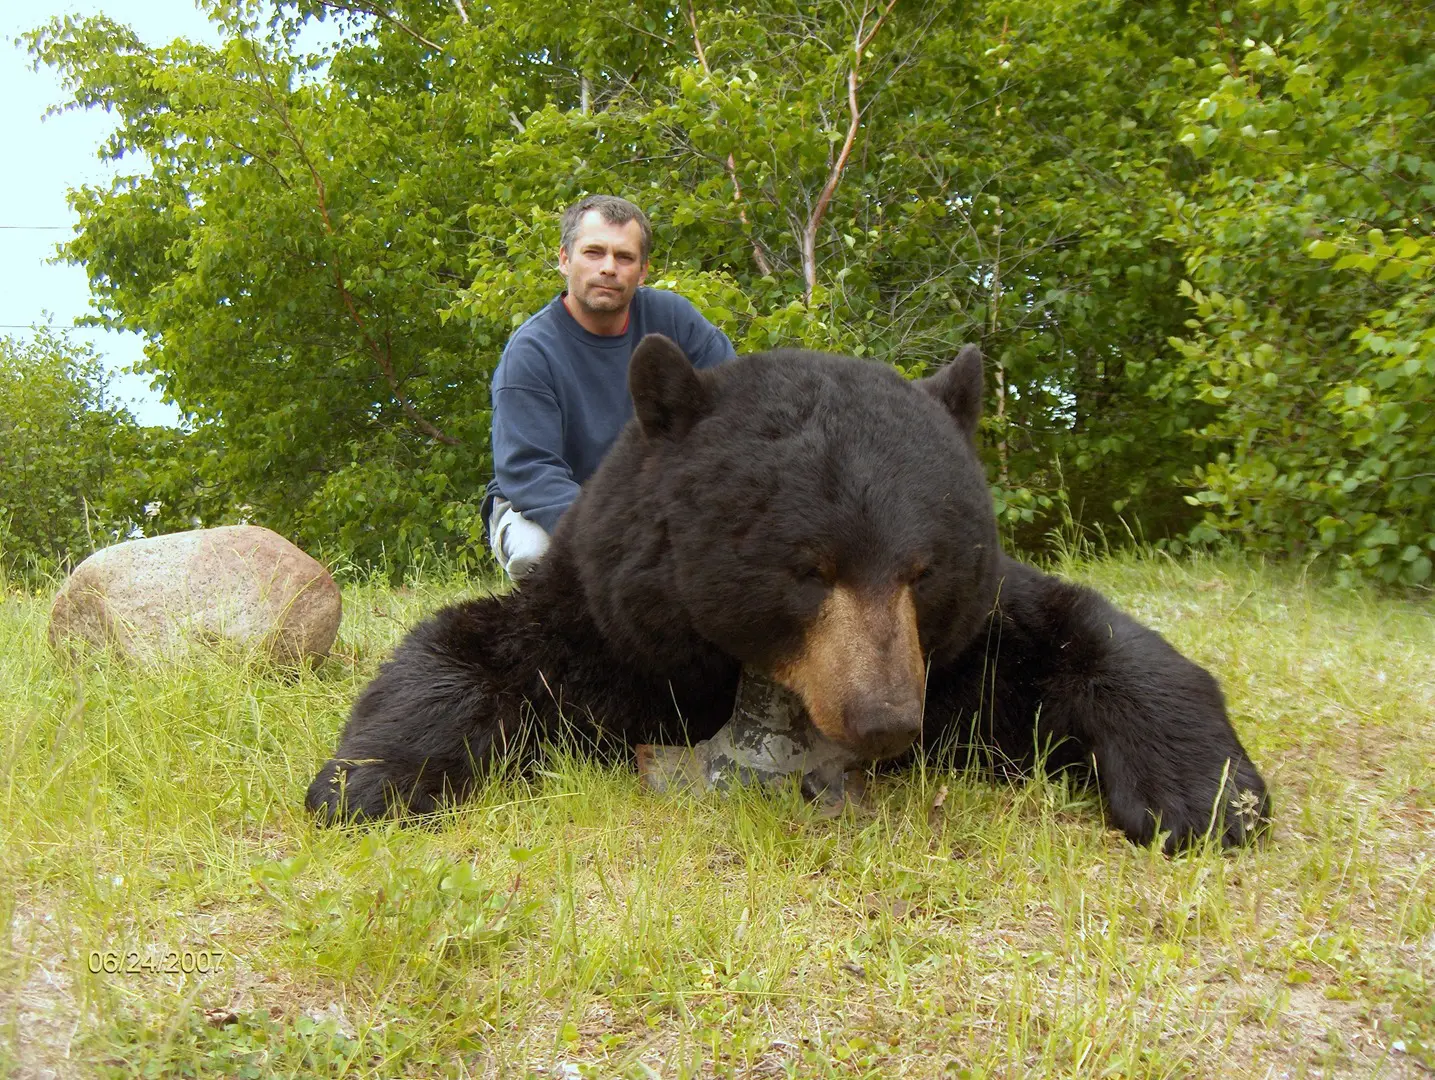 Man with a large black bear in a field